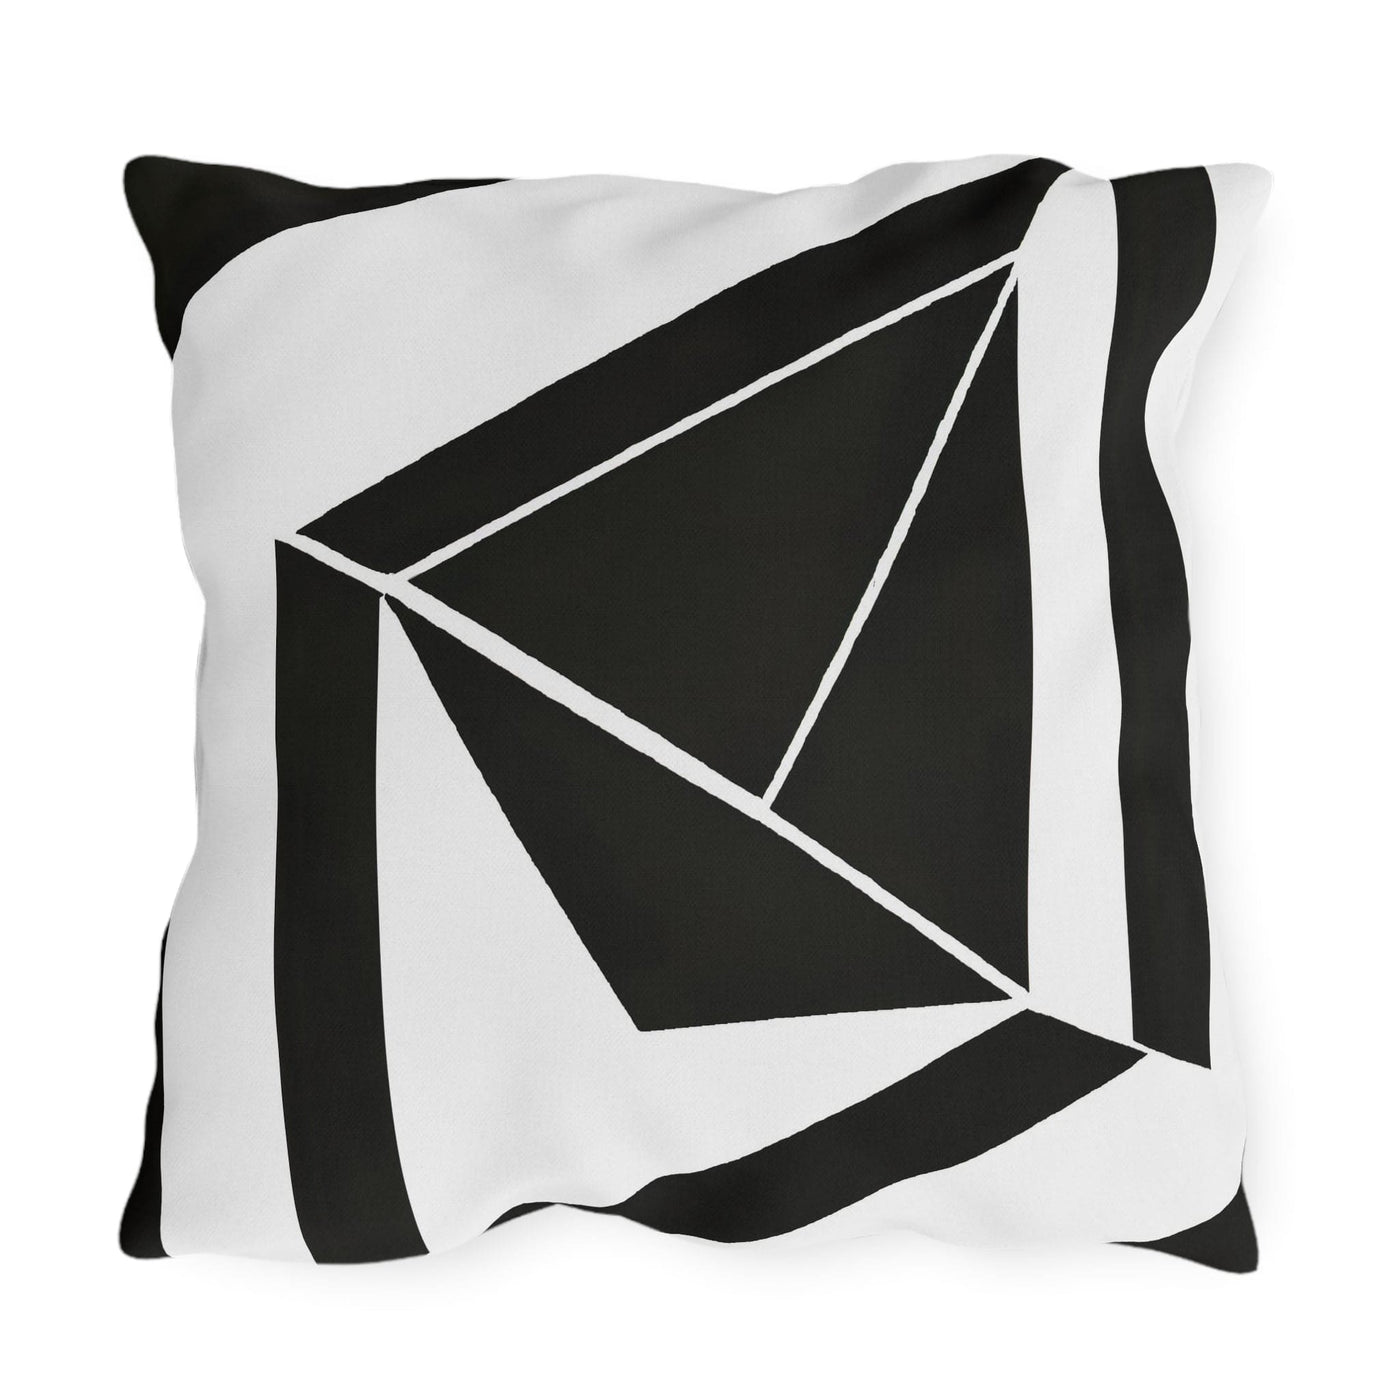 Decorative Outdoor Pillows With Zipper - Set Of 2 Black And White Geometric